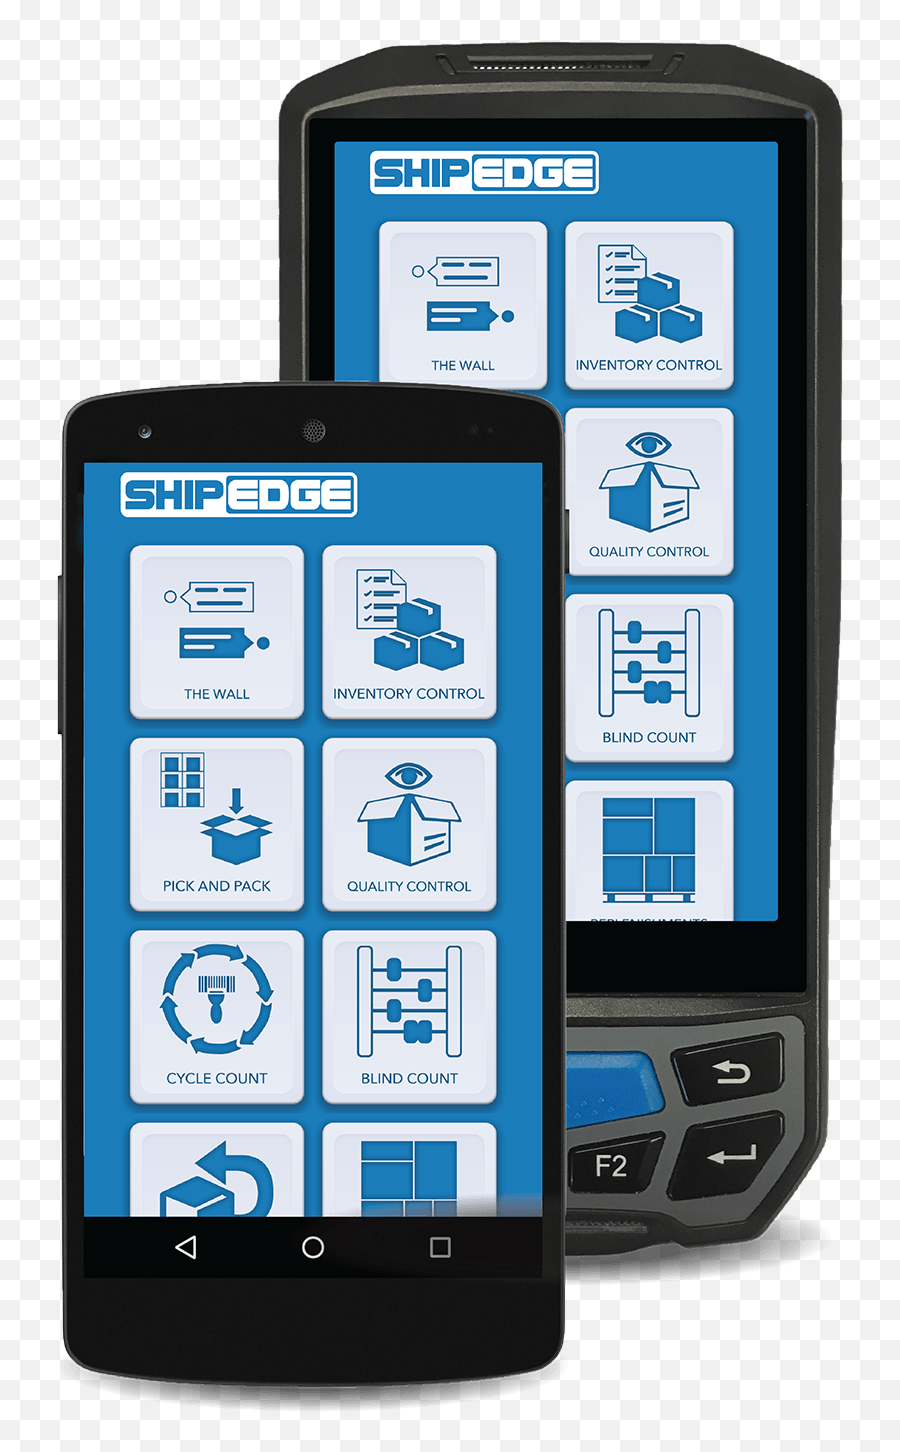 Mobile Barcode Scanner With Shipedge - Shipedge Mobile Wms Png,Barcode Scanning Icon